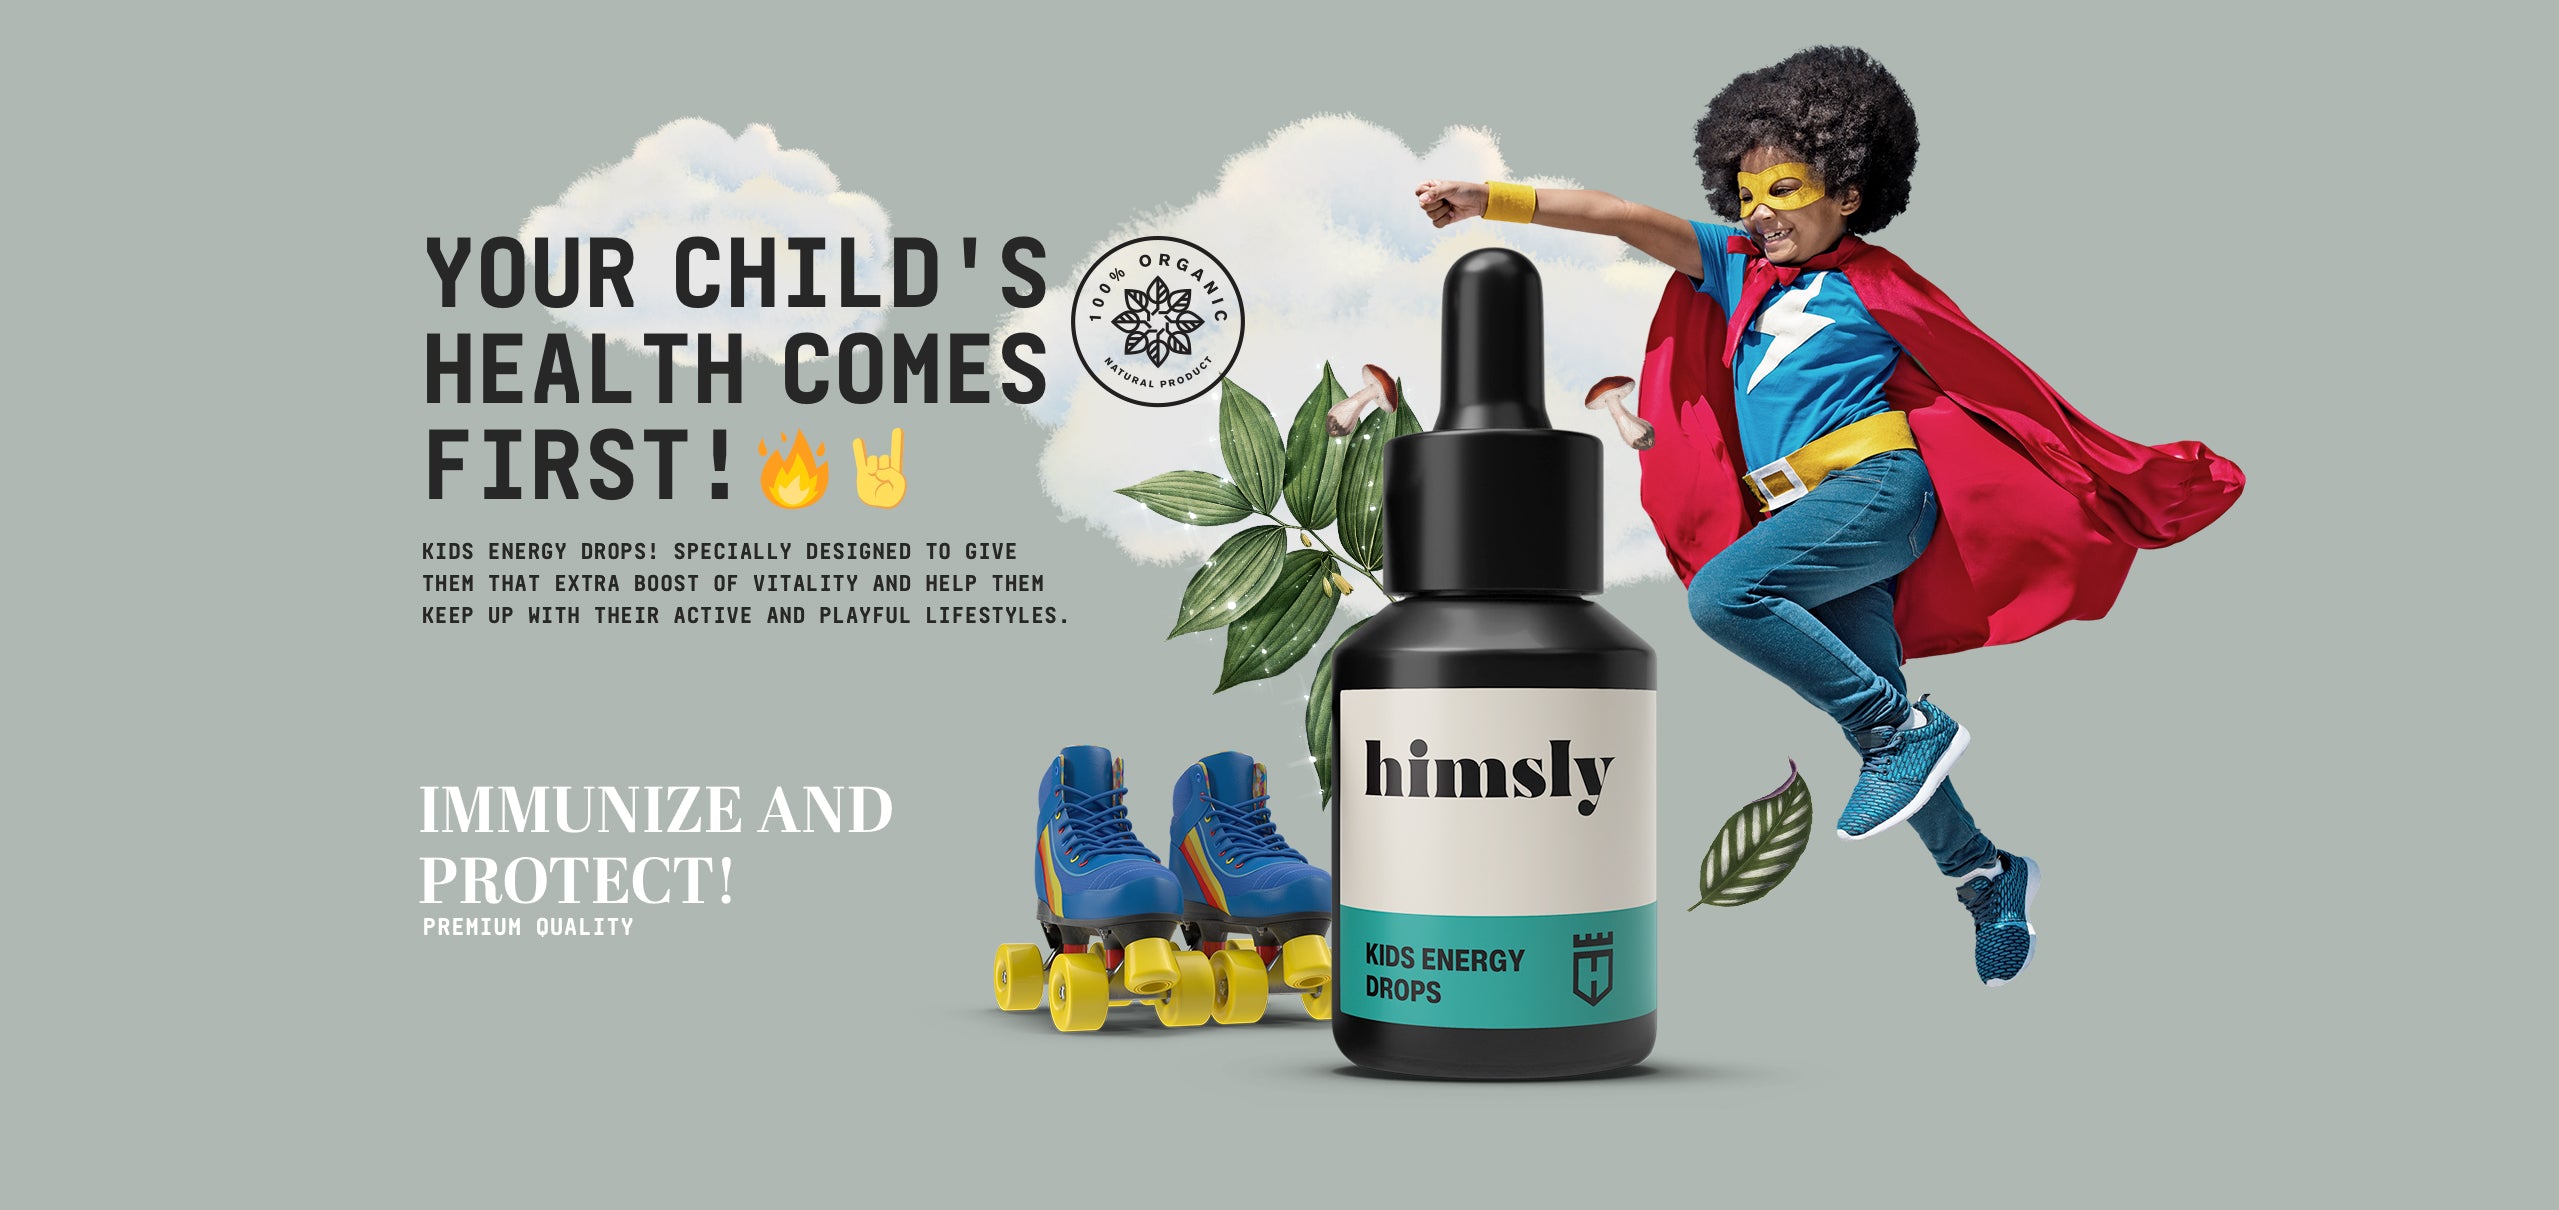 Specially designed for kids to give them that extra boost of vitality and keep up with their active and playful lifestyles.